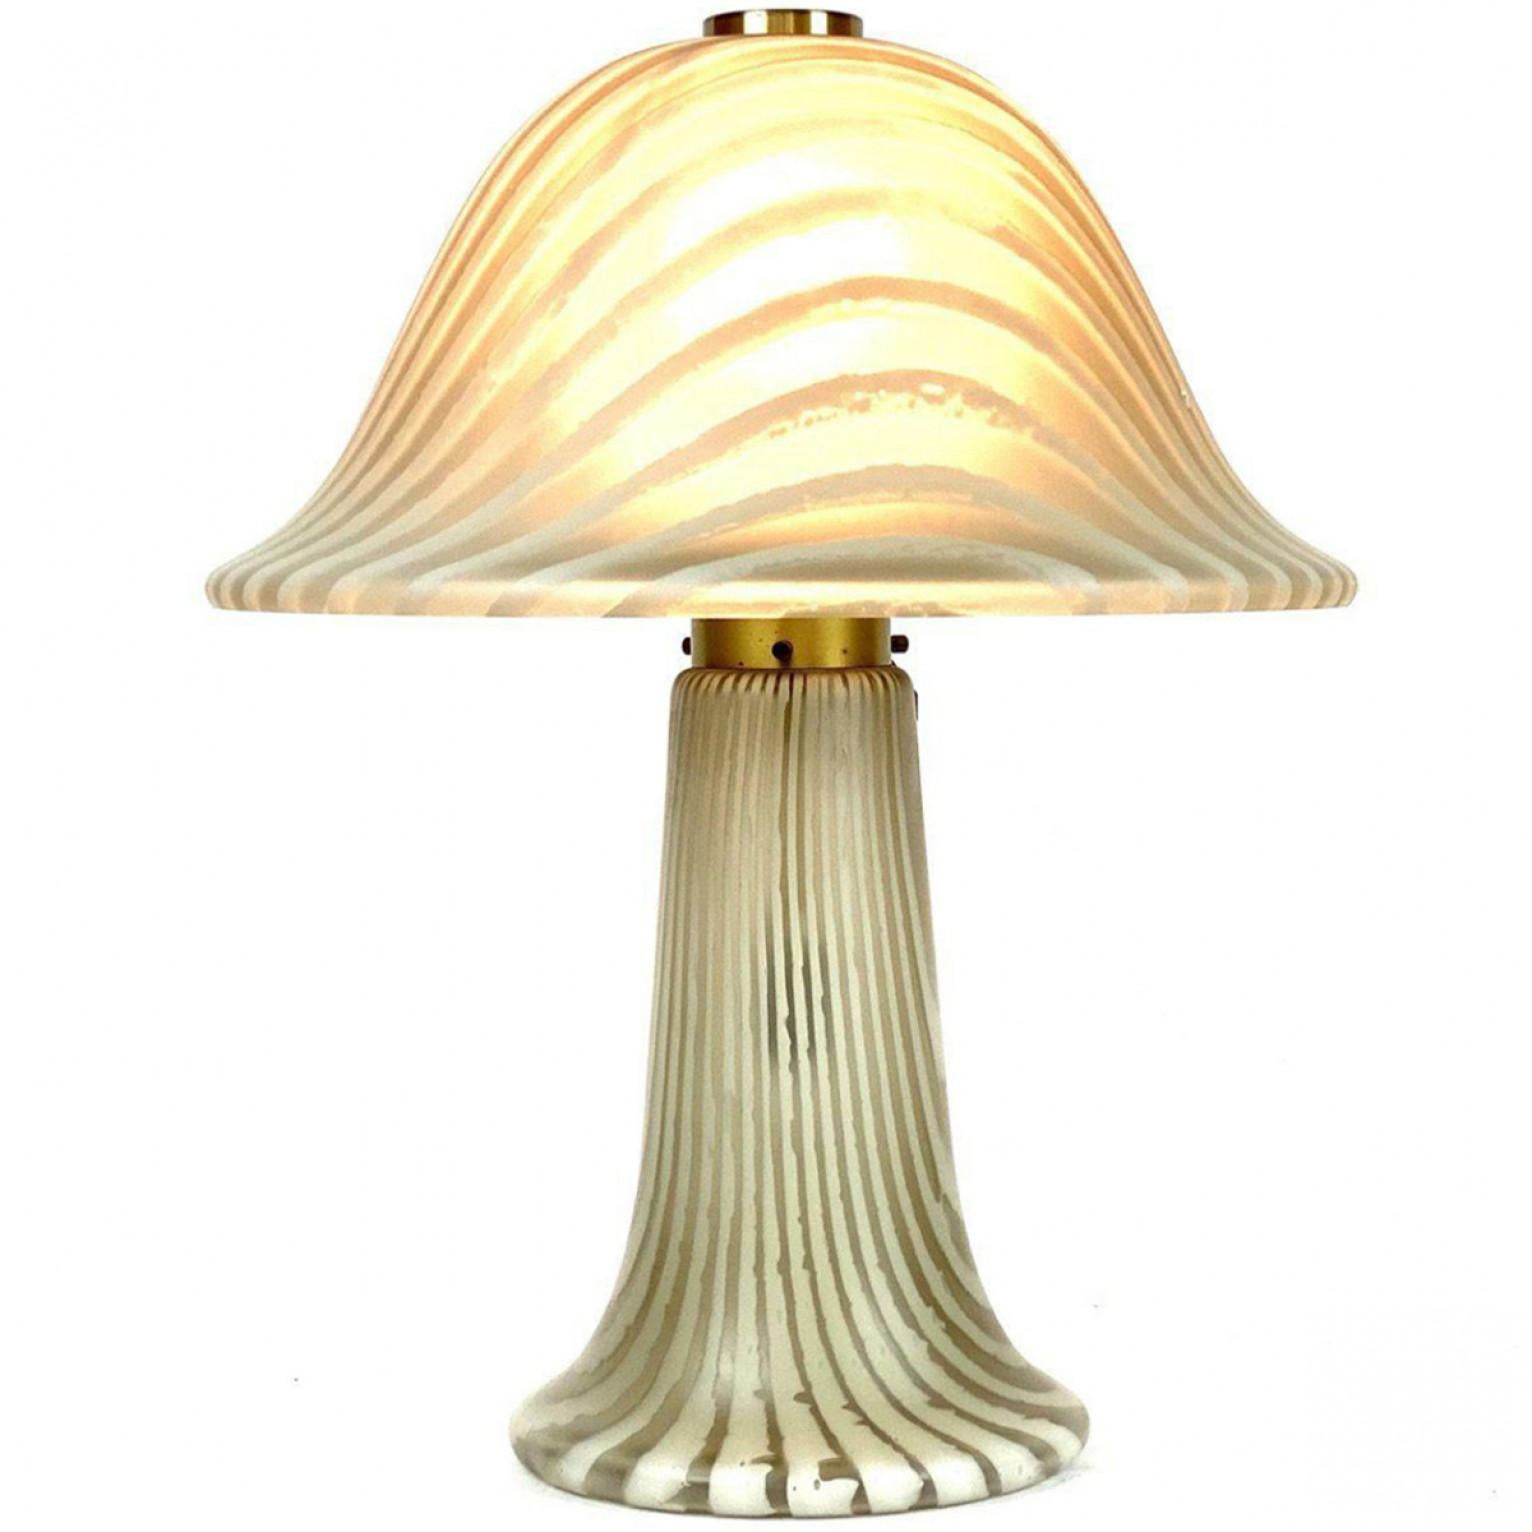 This unique Mid-Century Modern table lamp from the 1970s was designed by Peill & Putzler. It has a mushroom design made of hand-blown Murano glass and brass fixture. The glass was made to show its beautiful form. Both the colors of soft satin glass